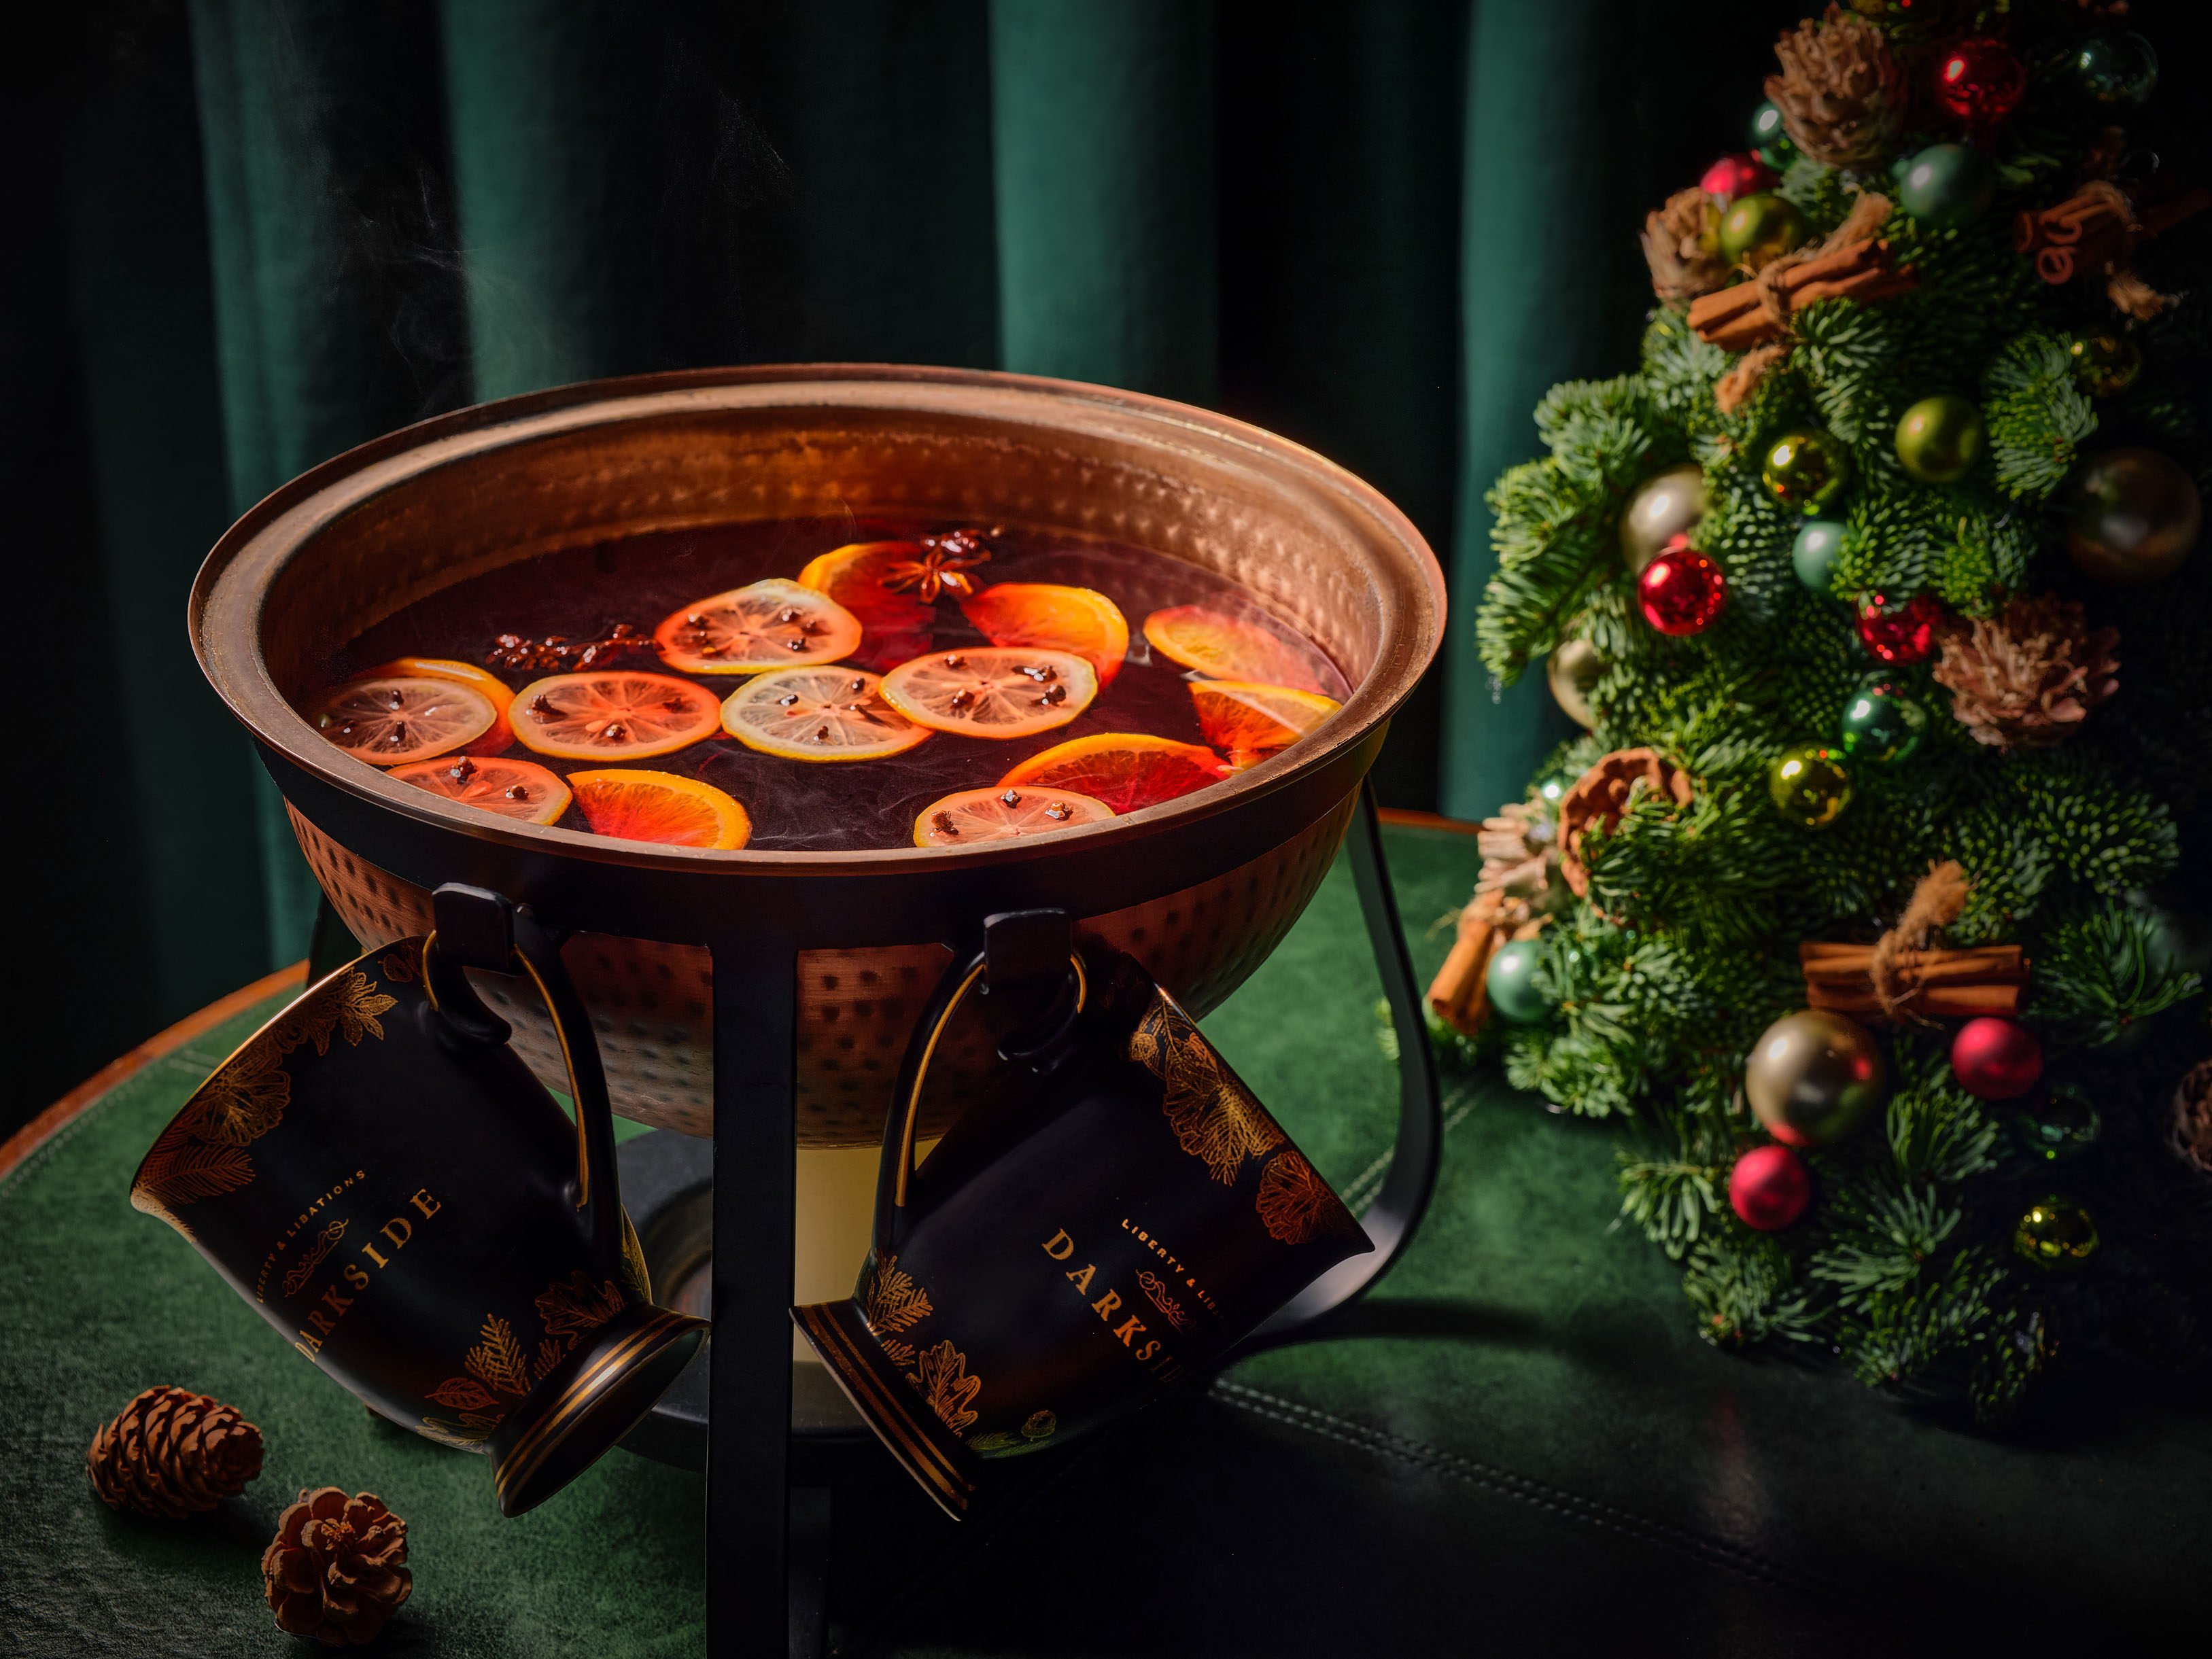 DarkSide’s All The Way Mulled Wine. Photo: Handout